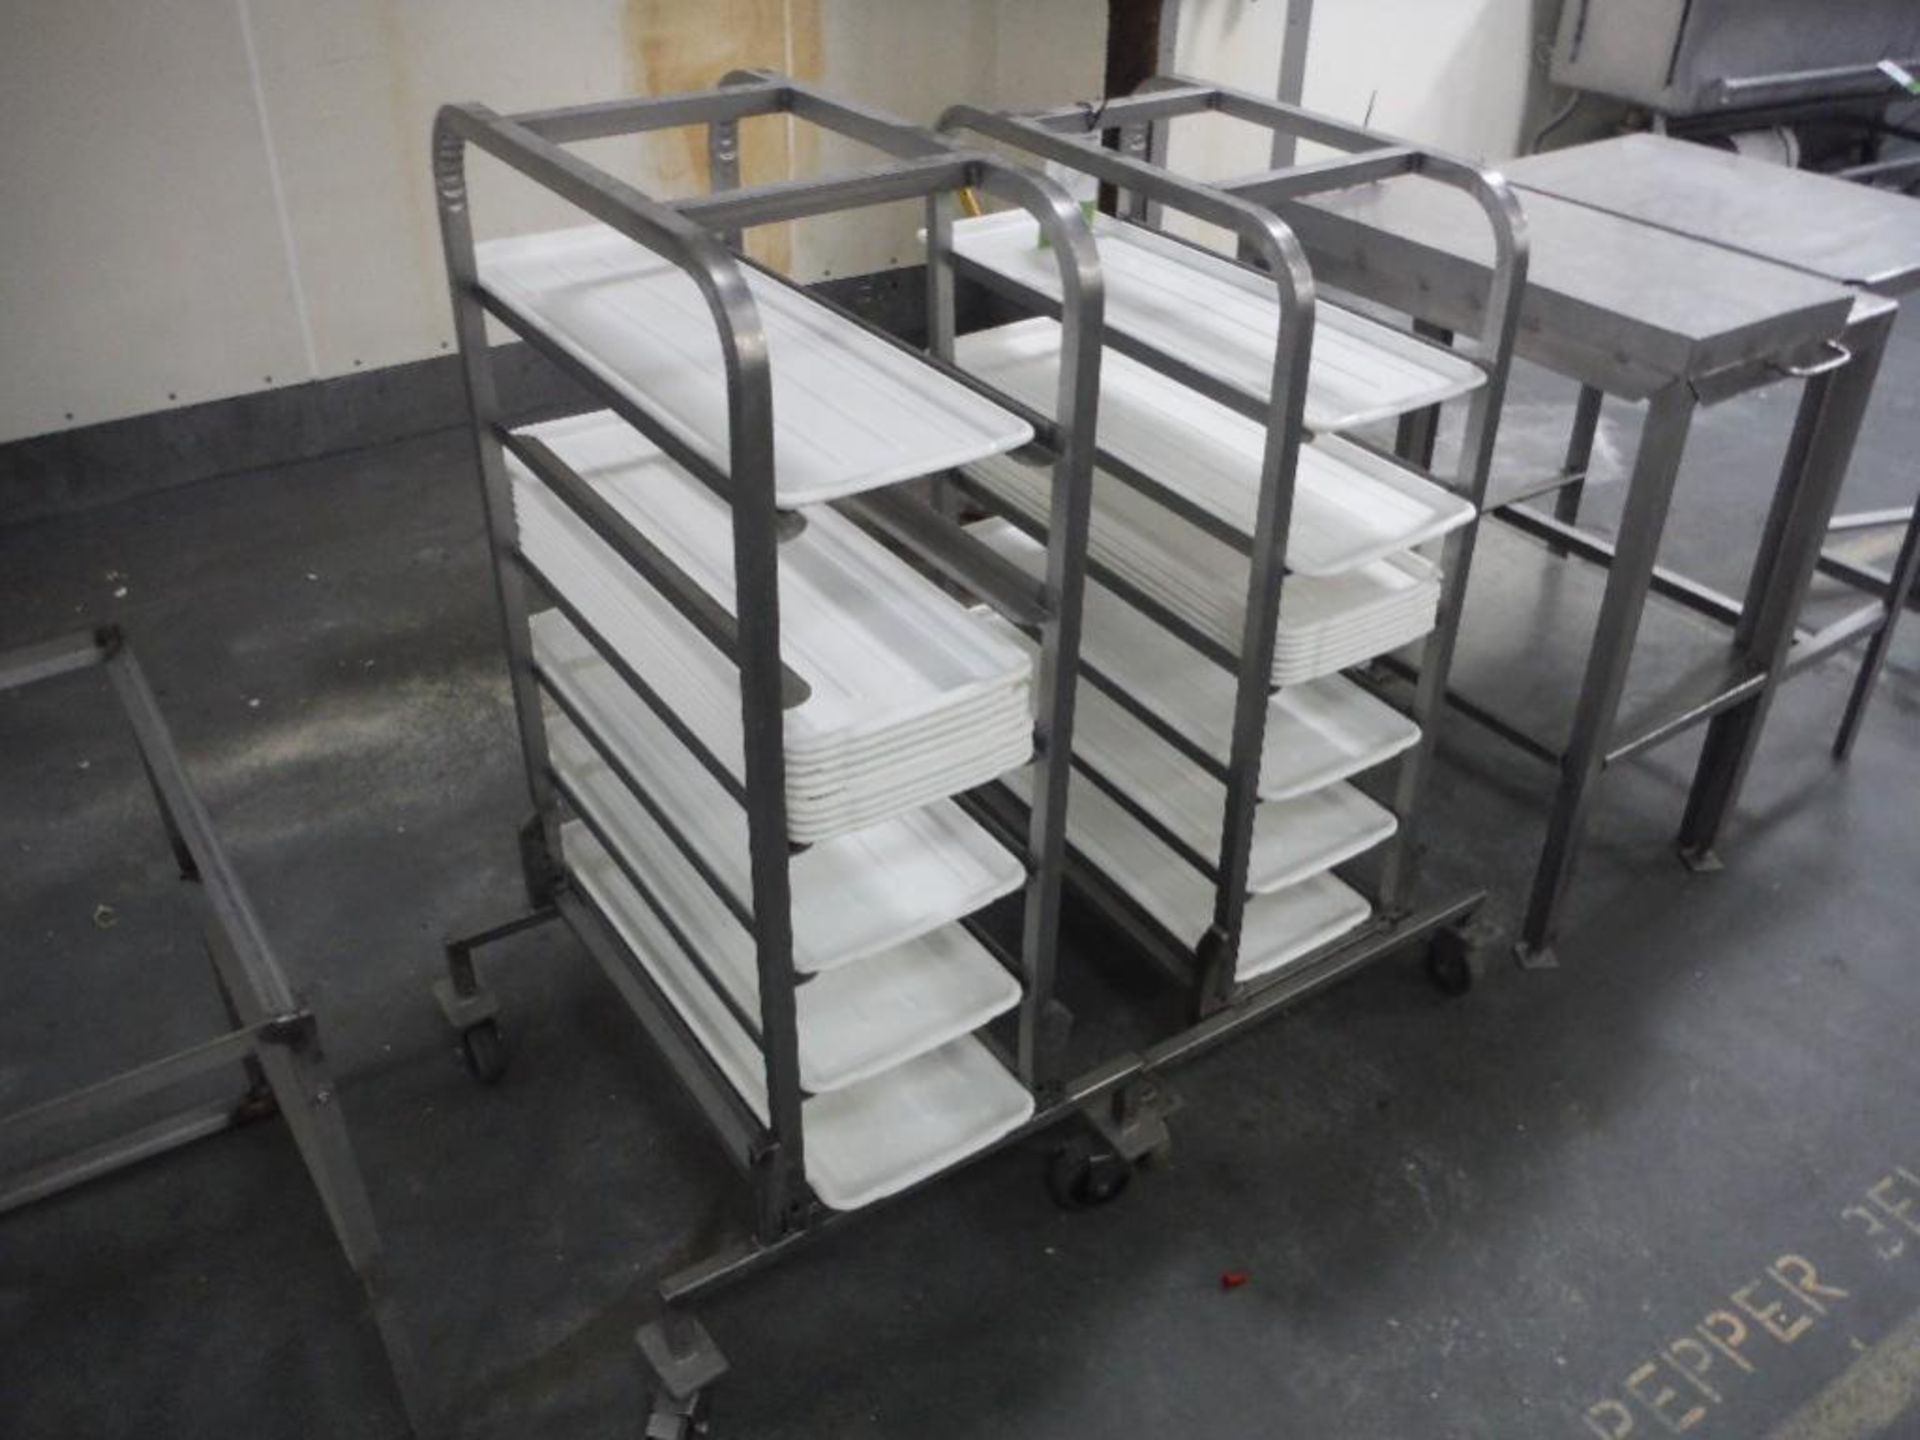 (2) SS pan carts for 11 in. x 26 in. trays, 6 shelves each, with pans (lot), **(Located in: Marshall - Image 4 of 4